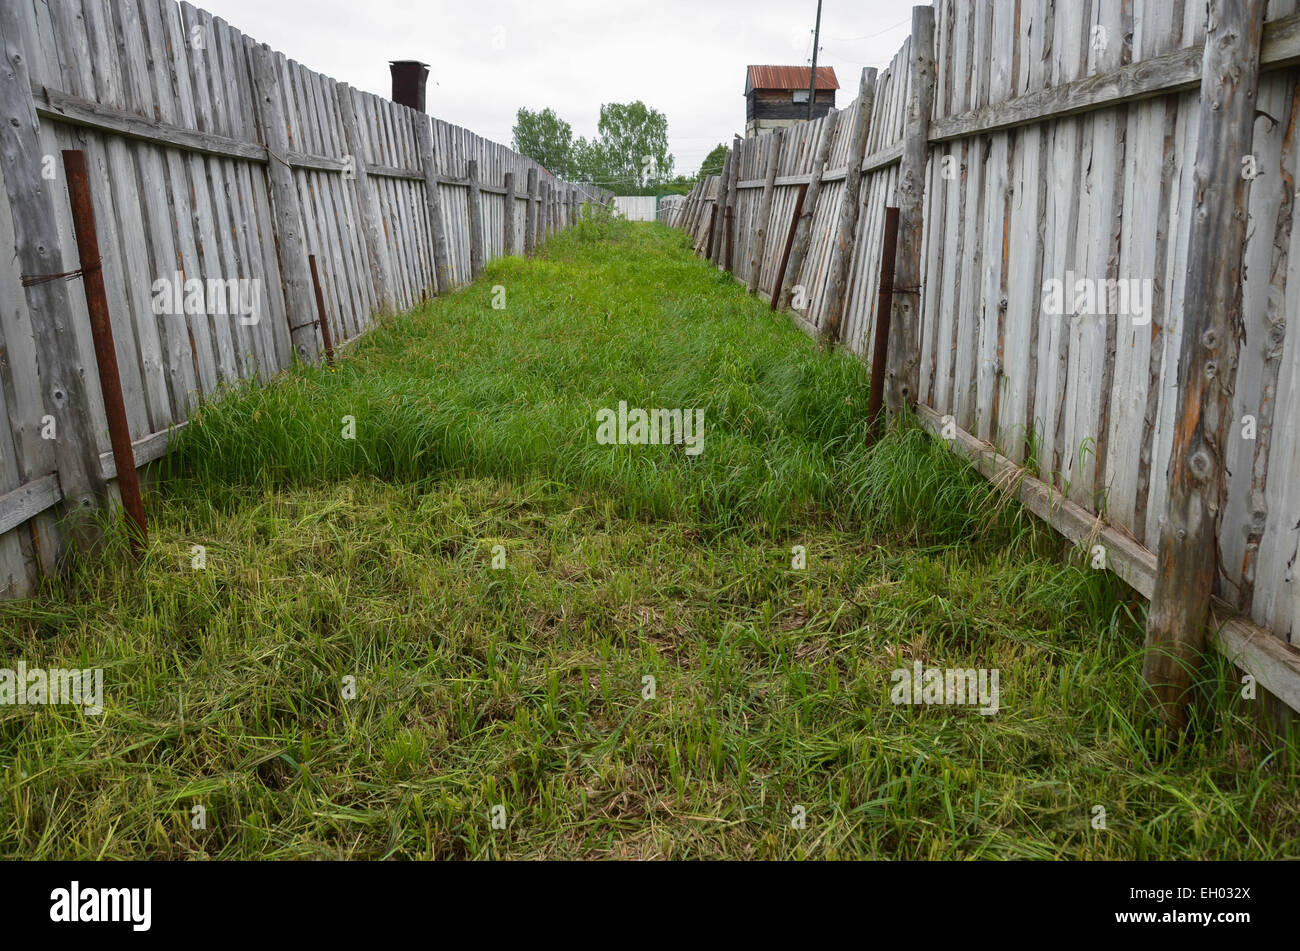 The former soviet gulag camp of Perm36, west of the Ural range in Russia near the town of Perm. Fence. Stock Photo